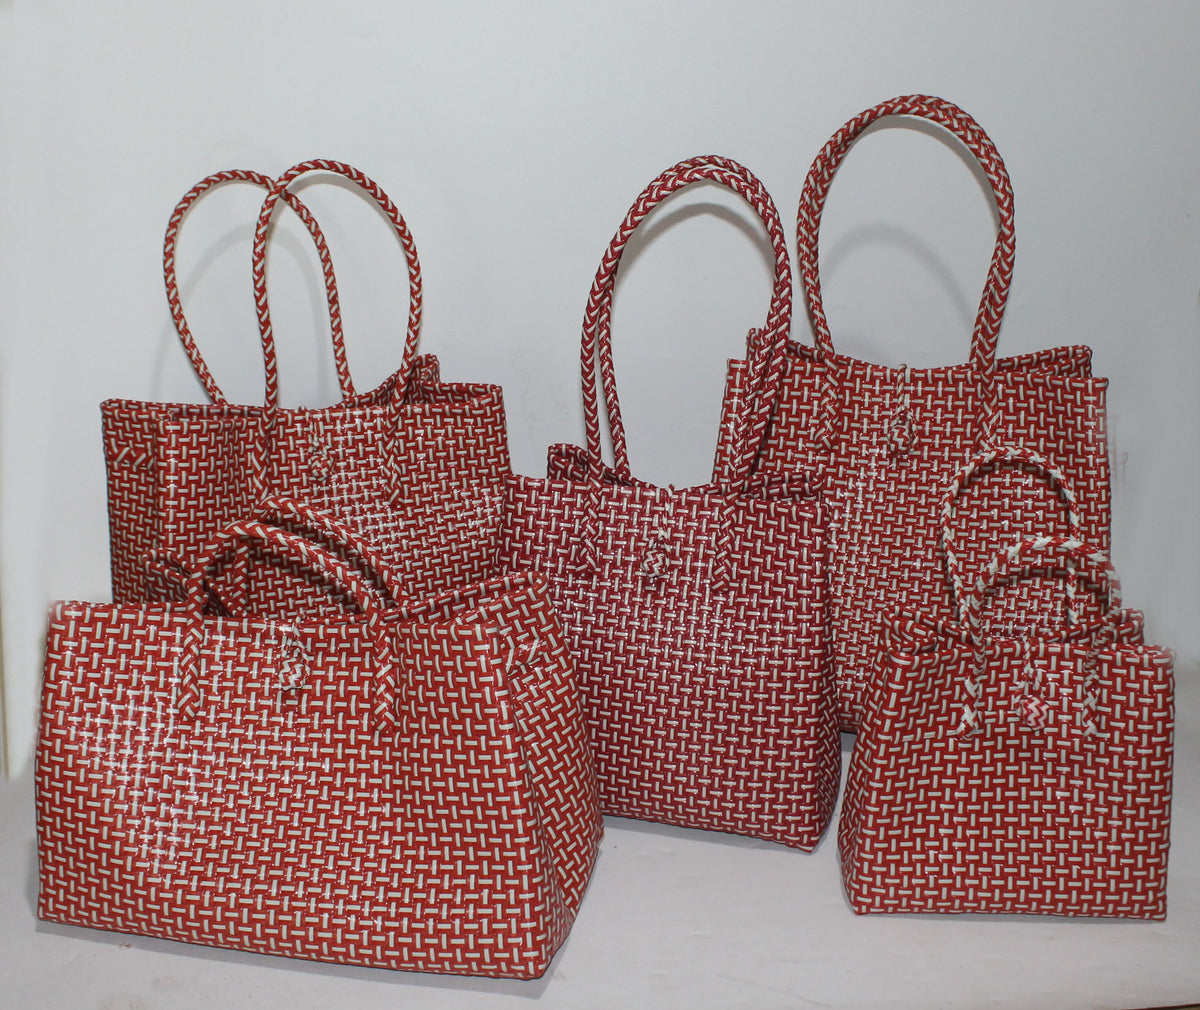 Woven Bag, Handmade in Bali, Recycled Material